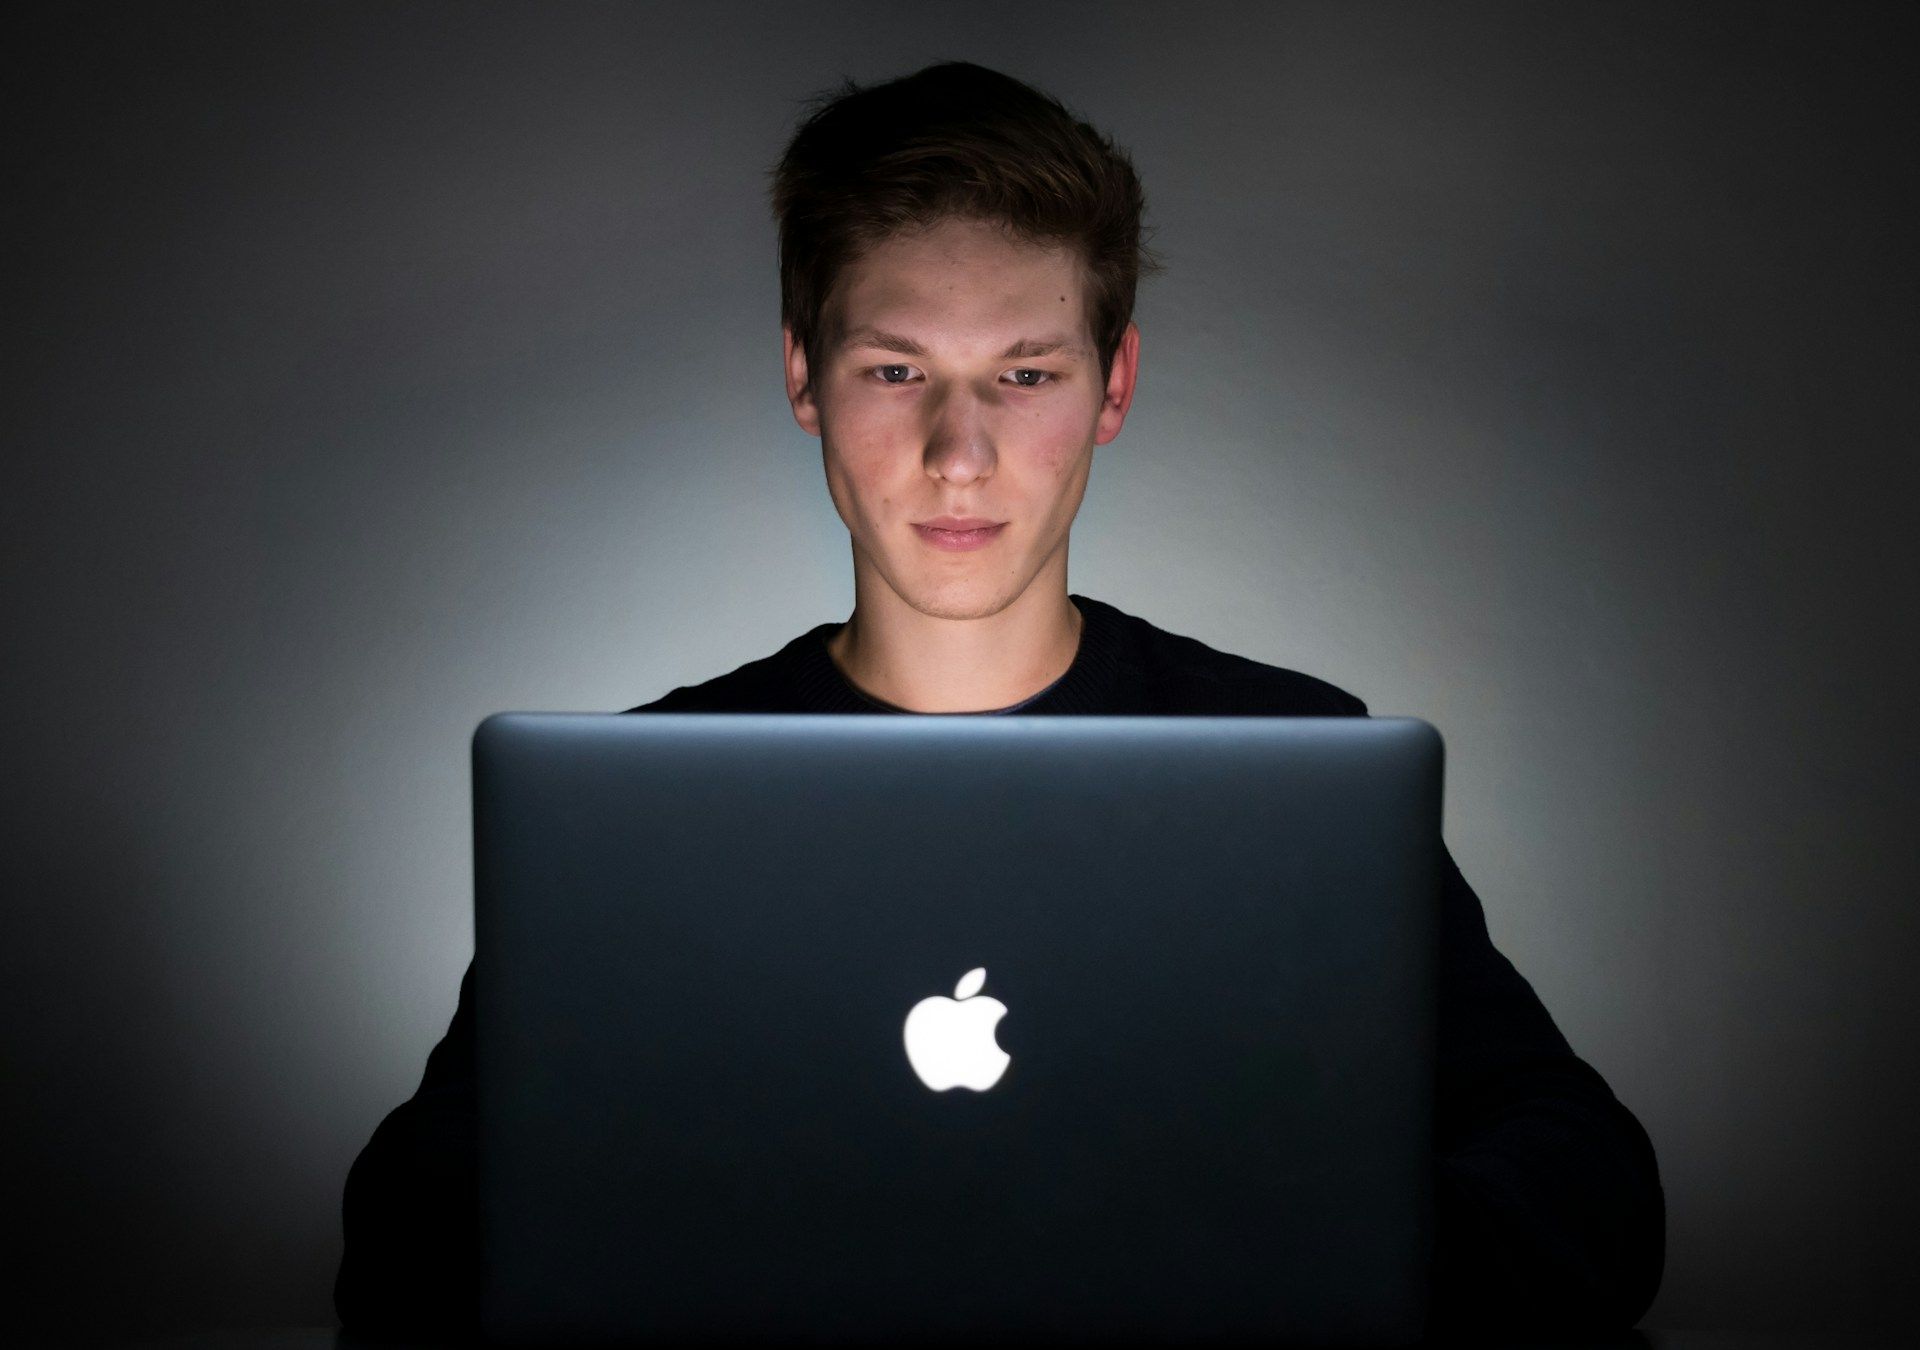 A serious young man using a laptop in the dark